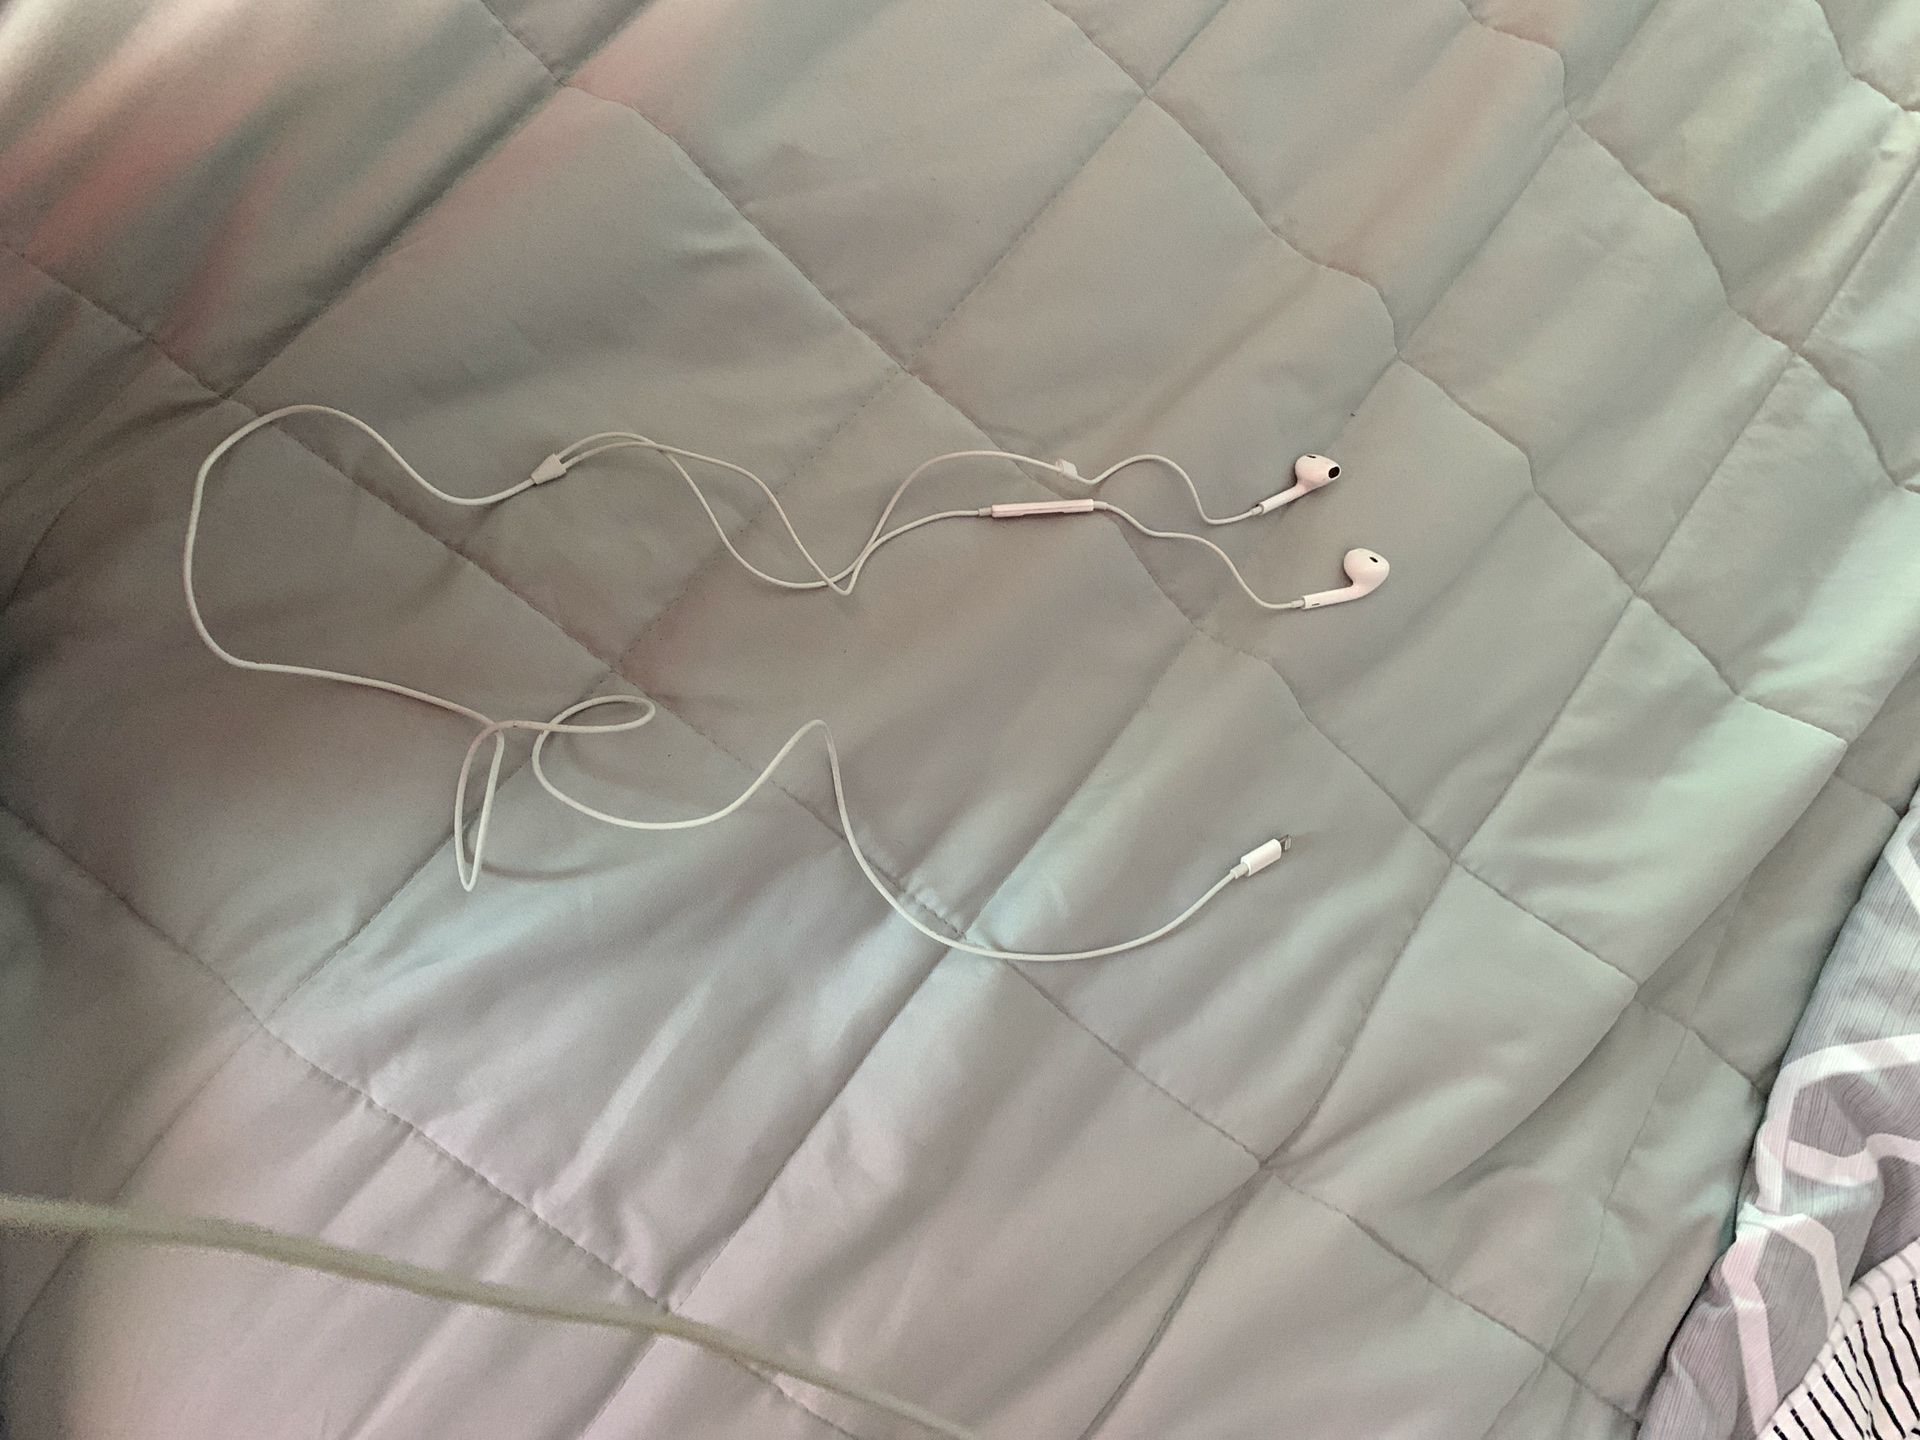 Wired iPhone earbuds